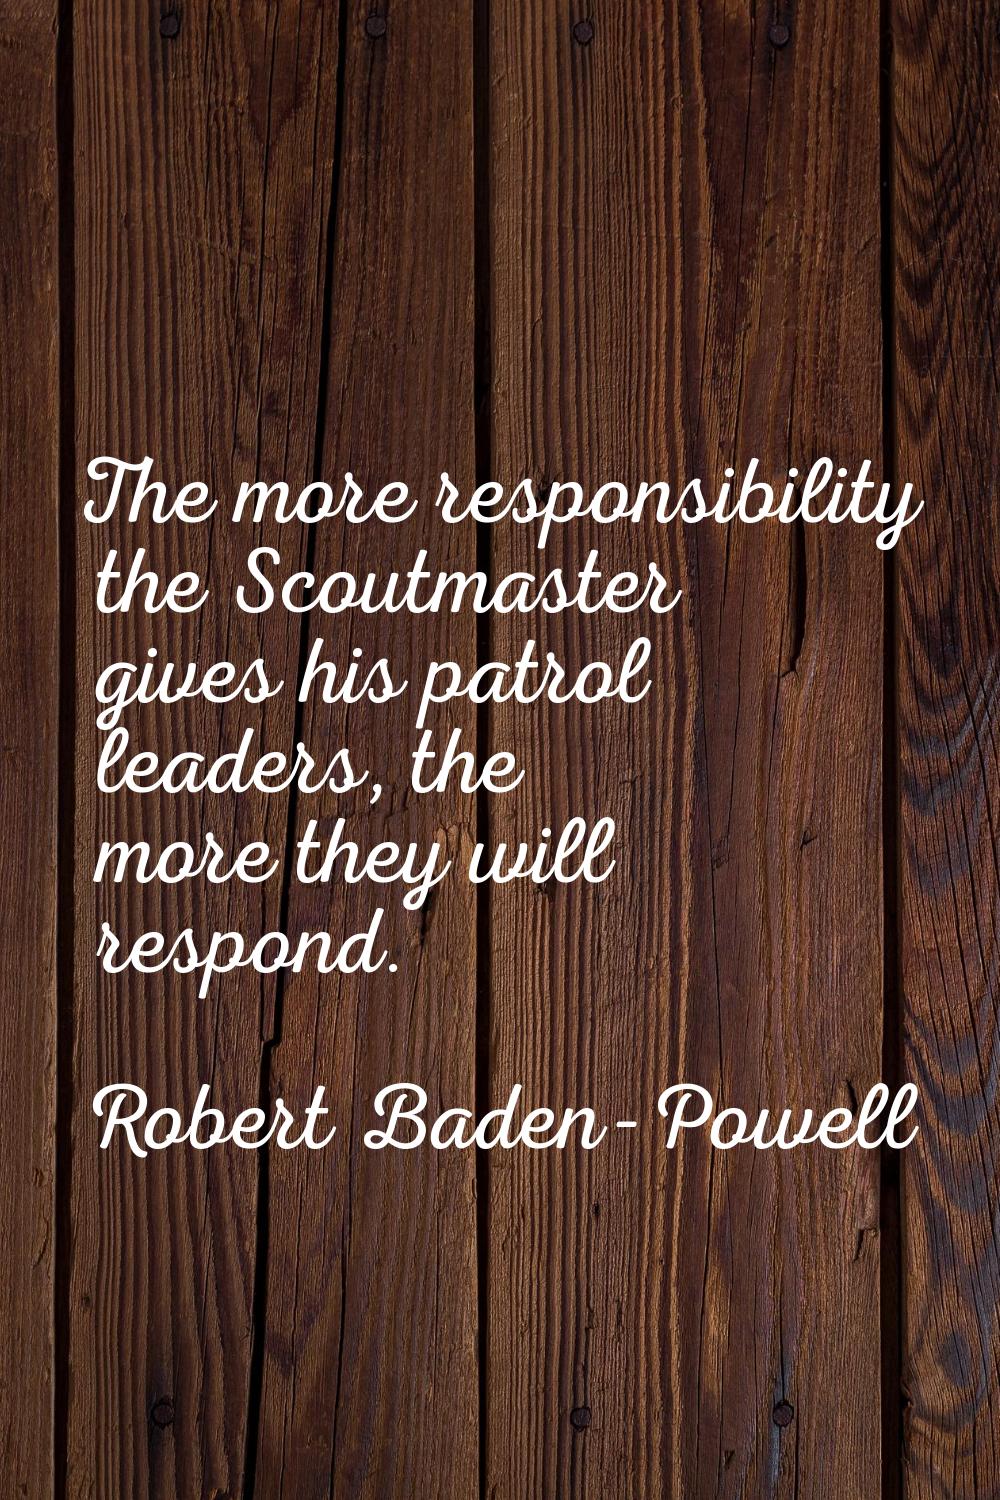 The more responsibility the Scoutmaster gives his patrol leaders, the more they will respond.